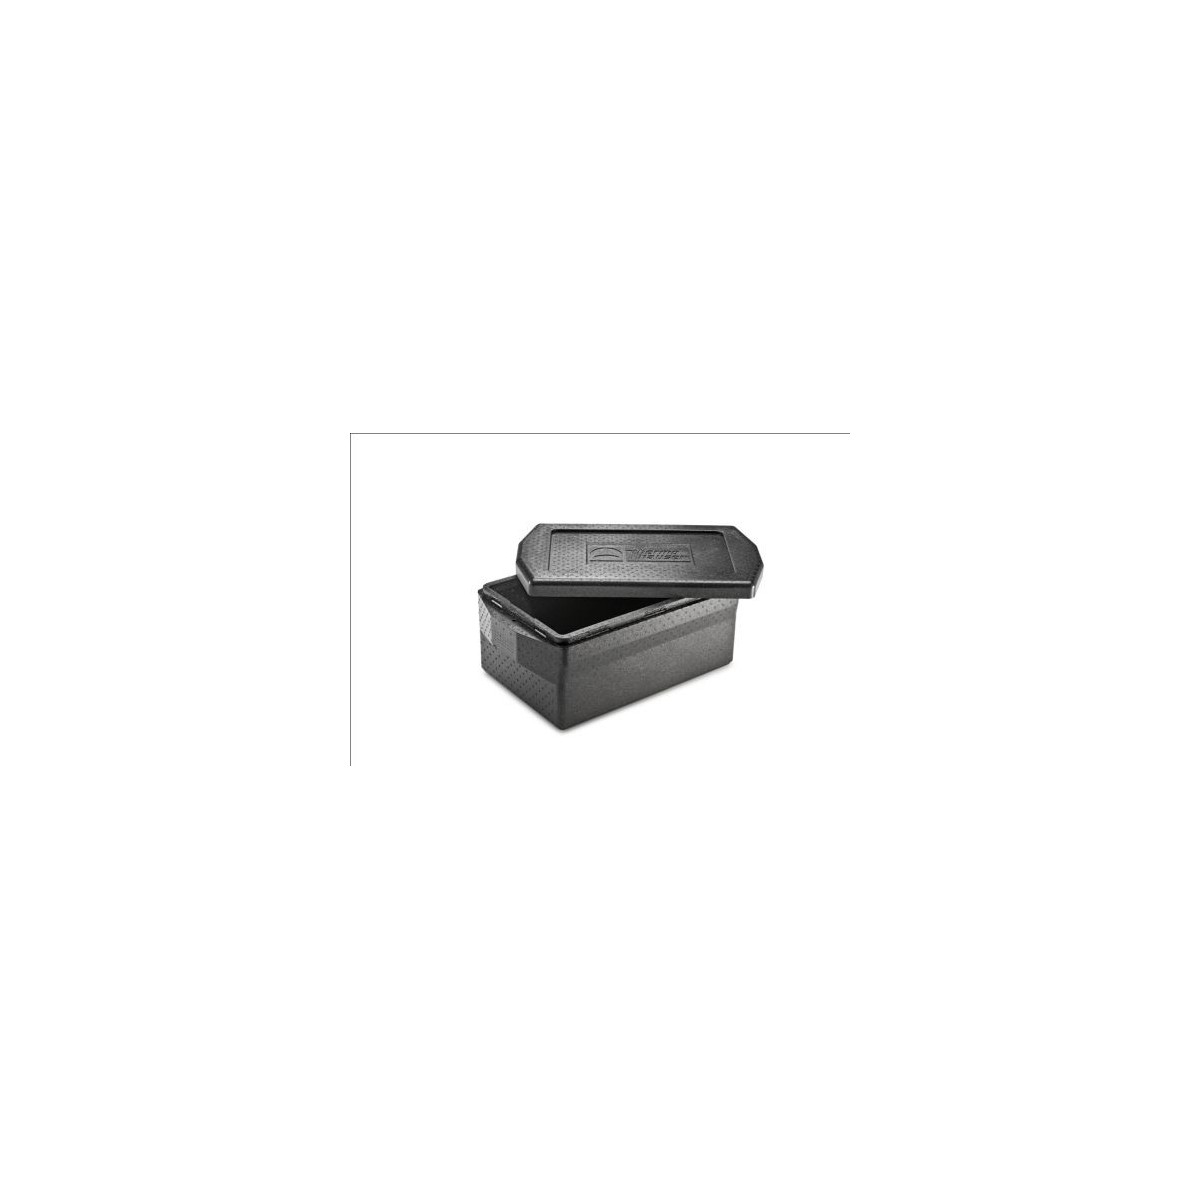 THERMOBOX THERMIC GN 1/1 COMFORT DIMENSIONS  INTERIEURRES 55X34X25CM